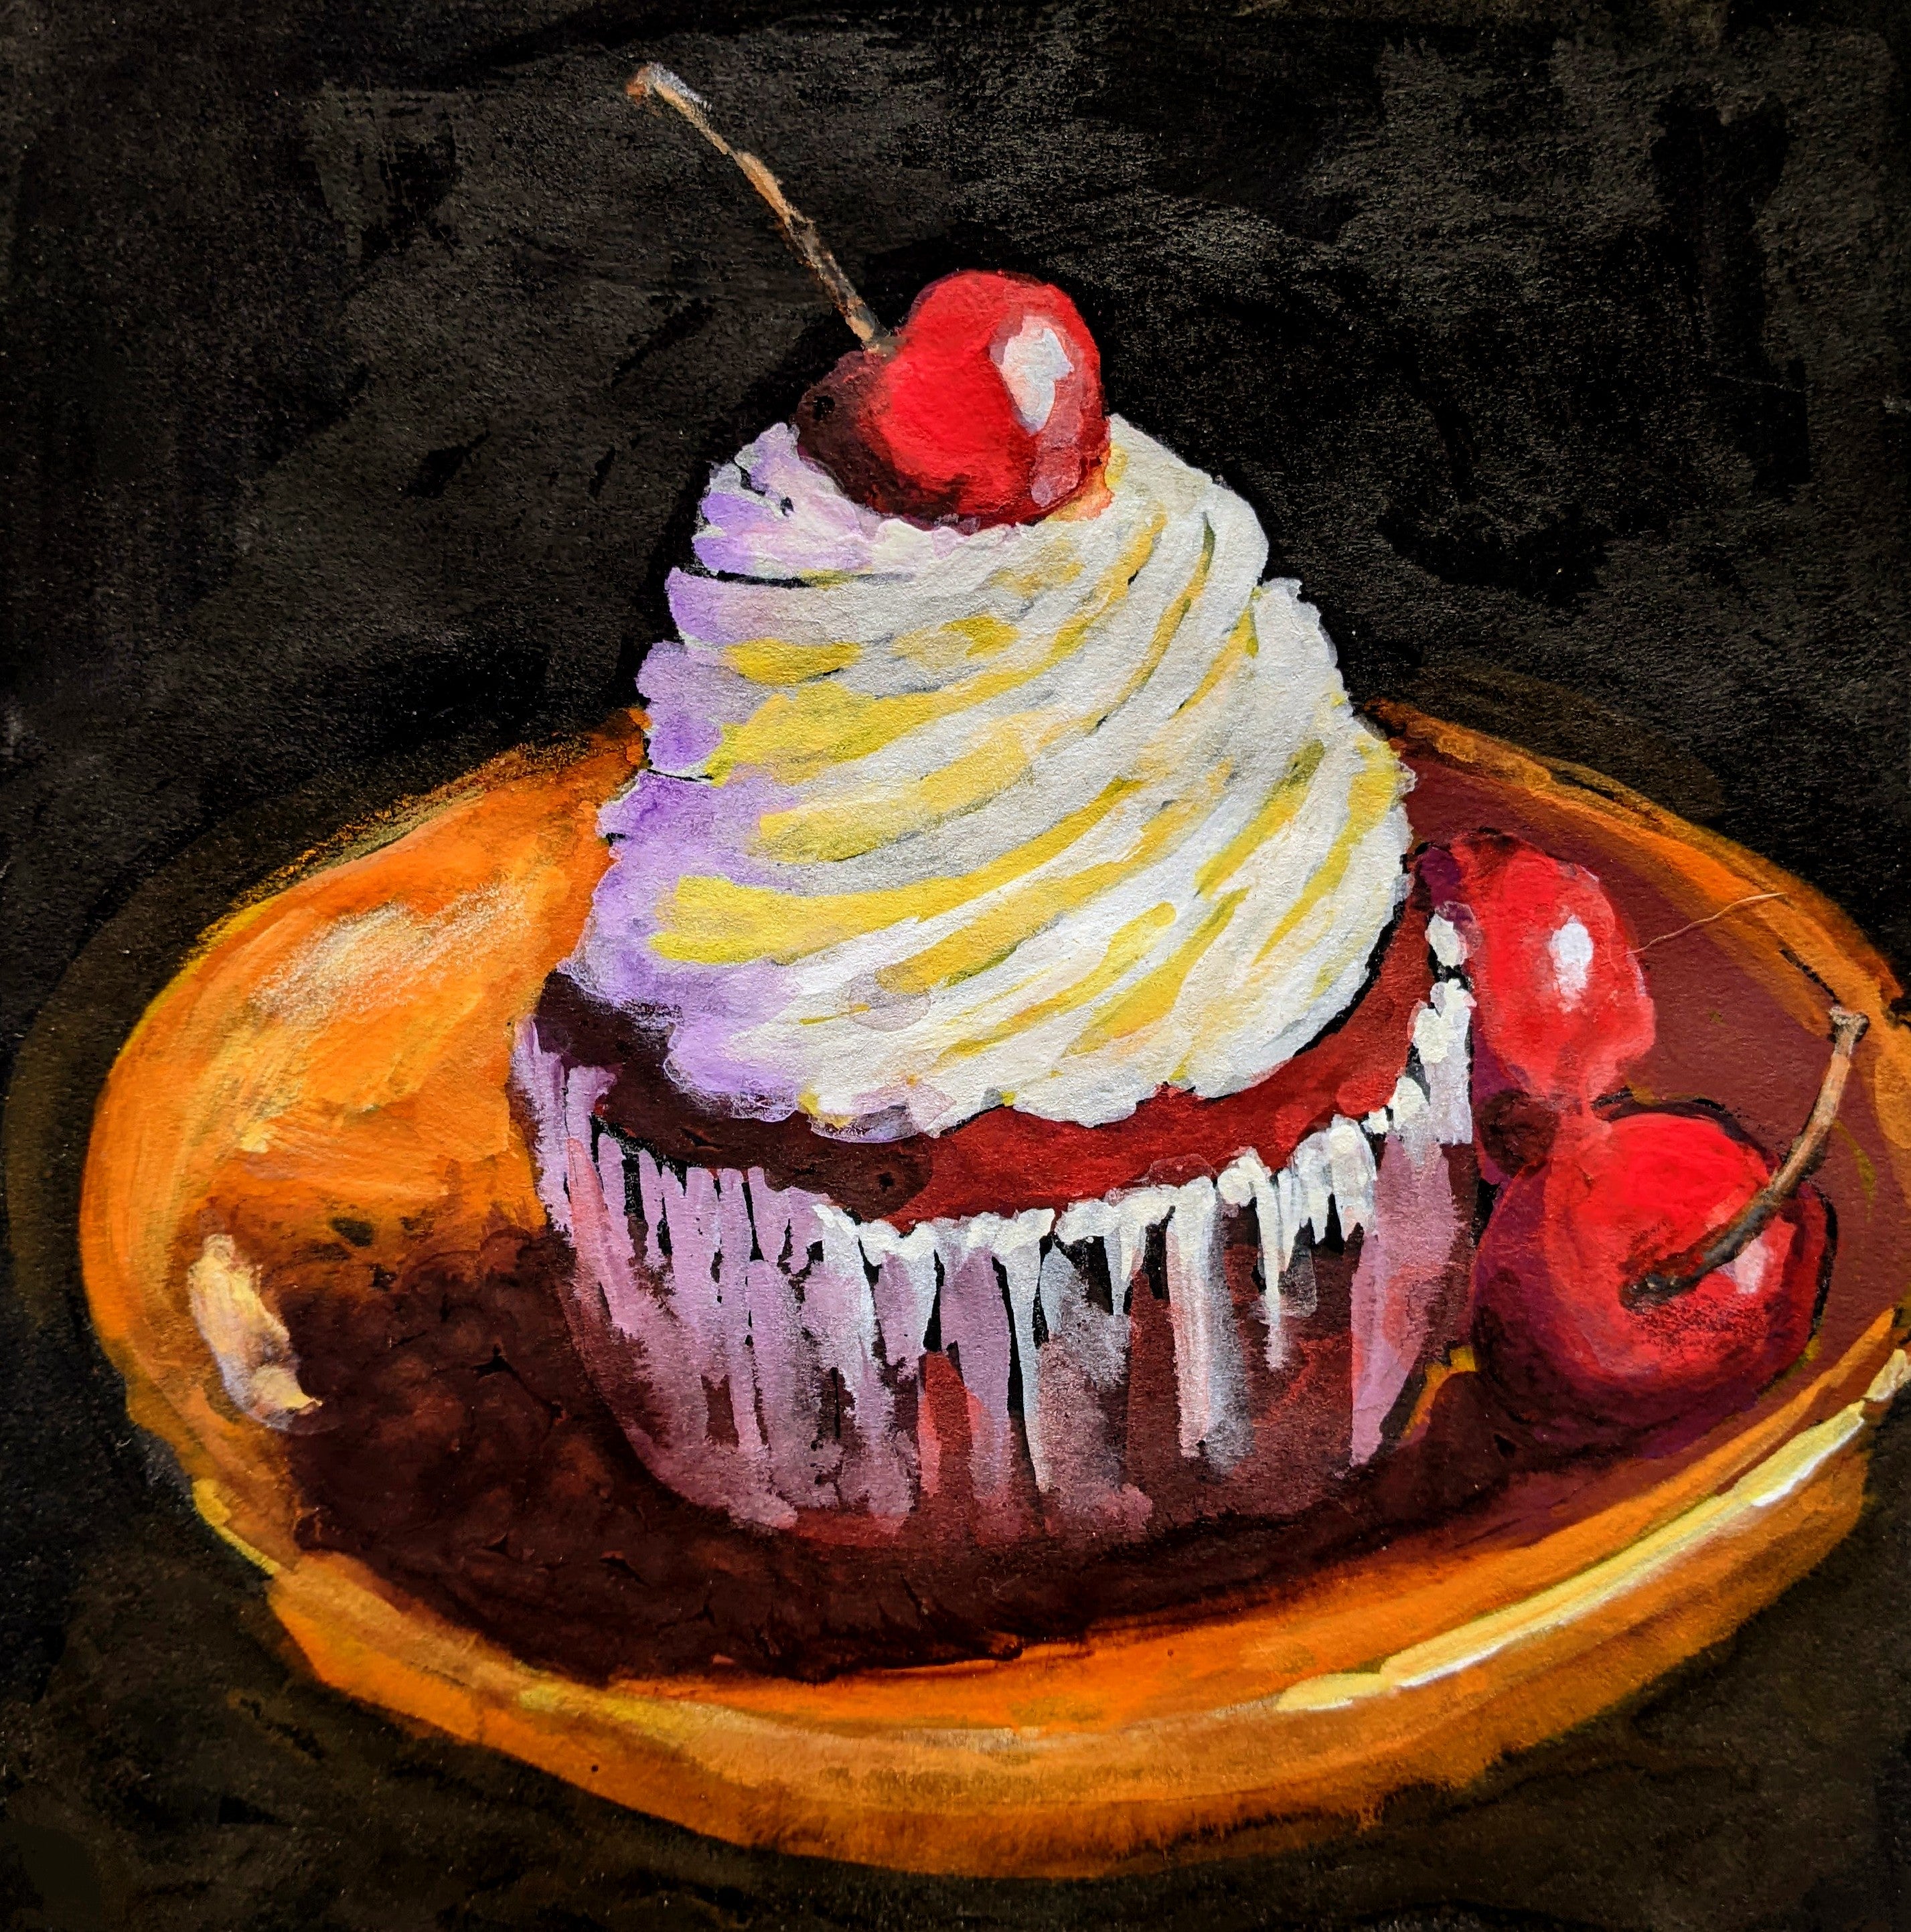 Acrylic painting of cupcake at midnight, topped with mound of frosting and red, red cherries.